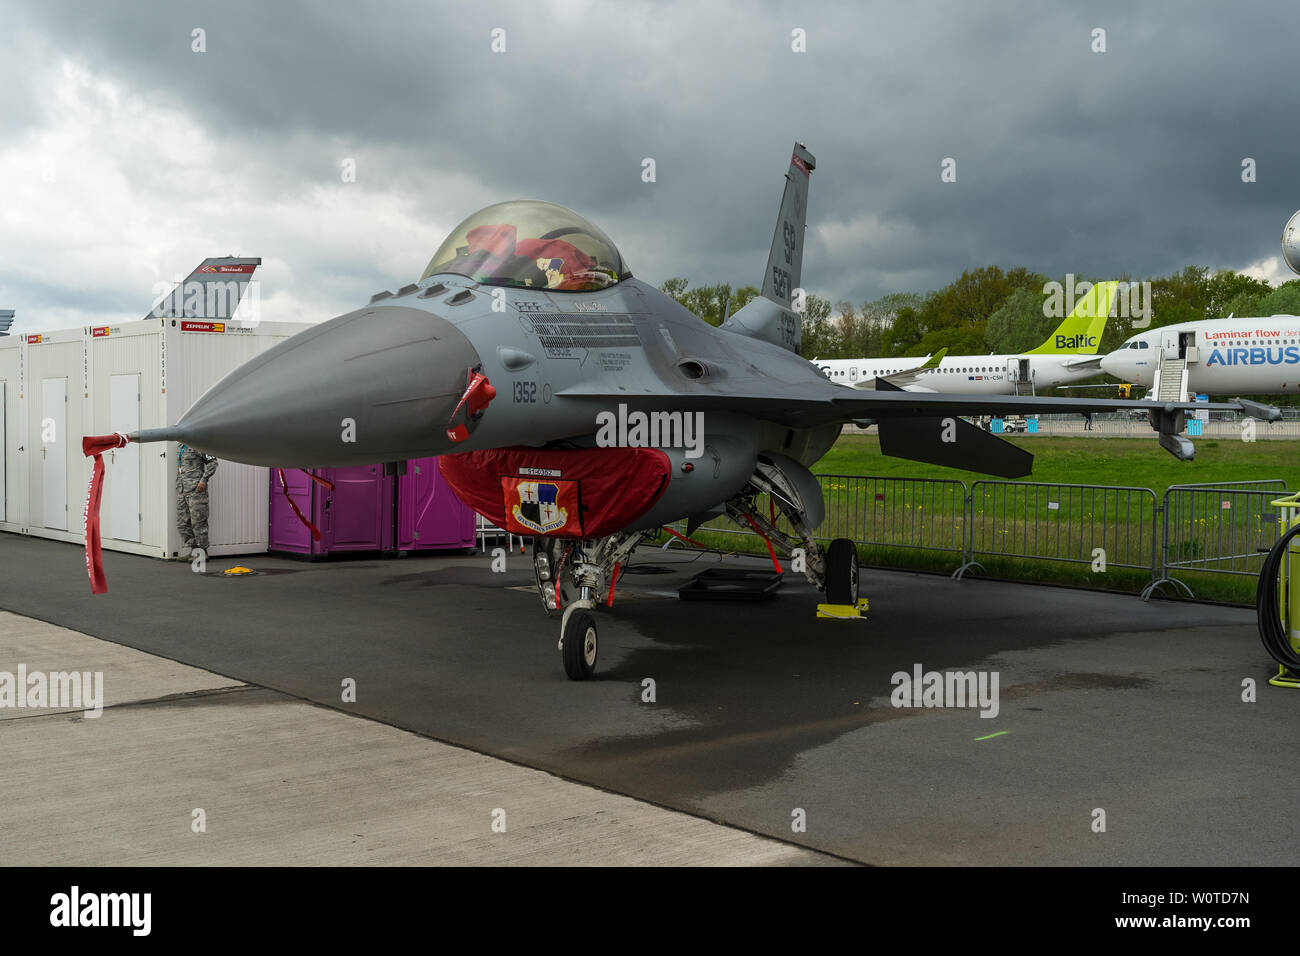 BERLIN - APRIL 26, 2018: Multirole fighter, air superiority fighter General Dynamics F-16 Fighting Falcon. US Air Force. Exhibition ILA Berlin Air Show 2018. Stock Photo